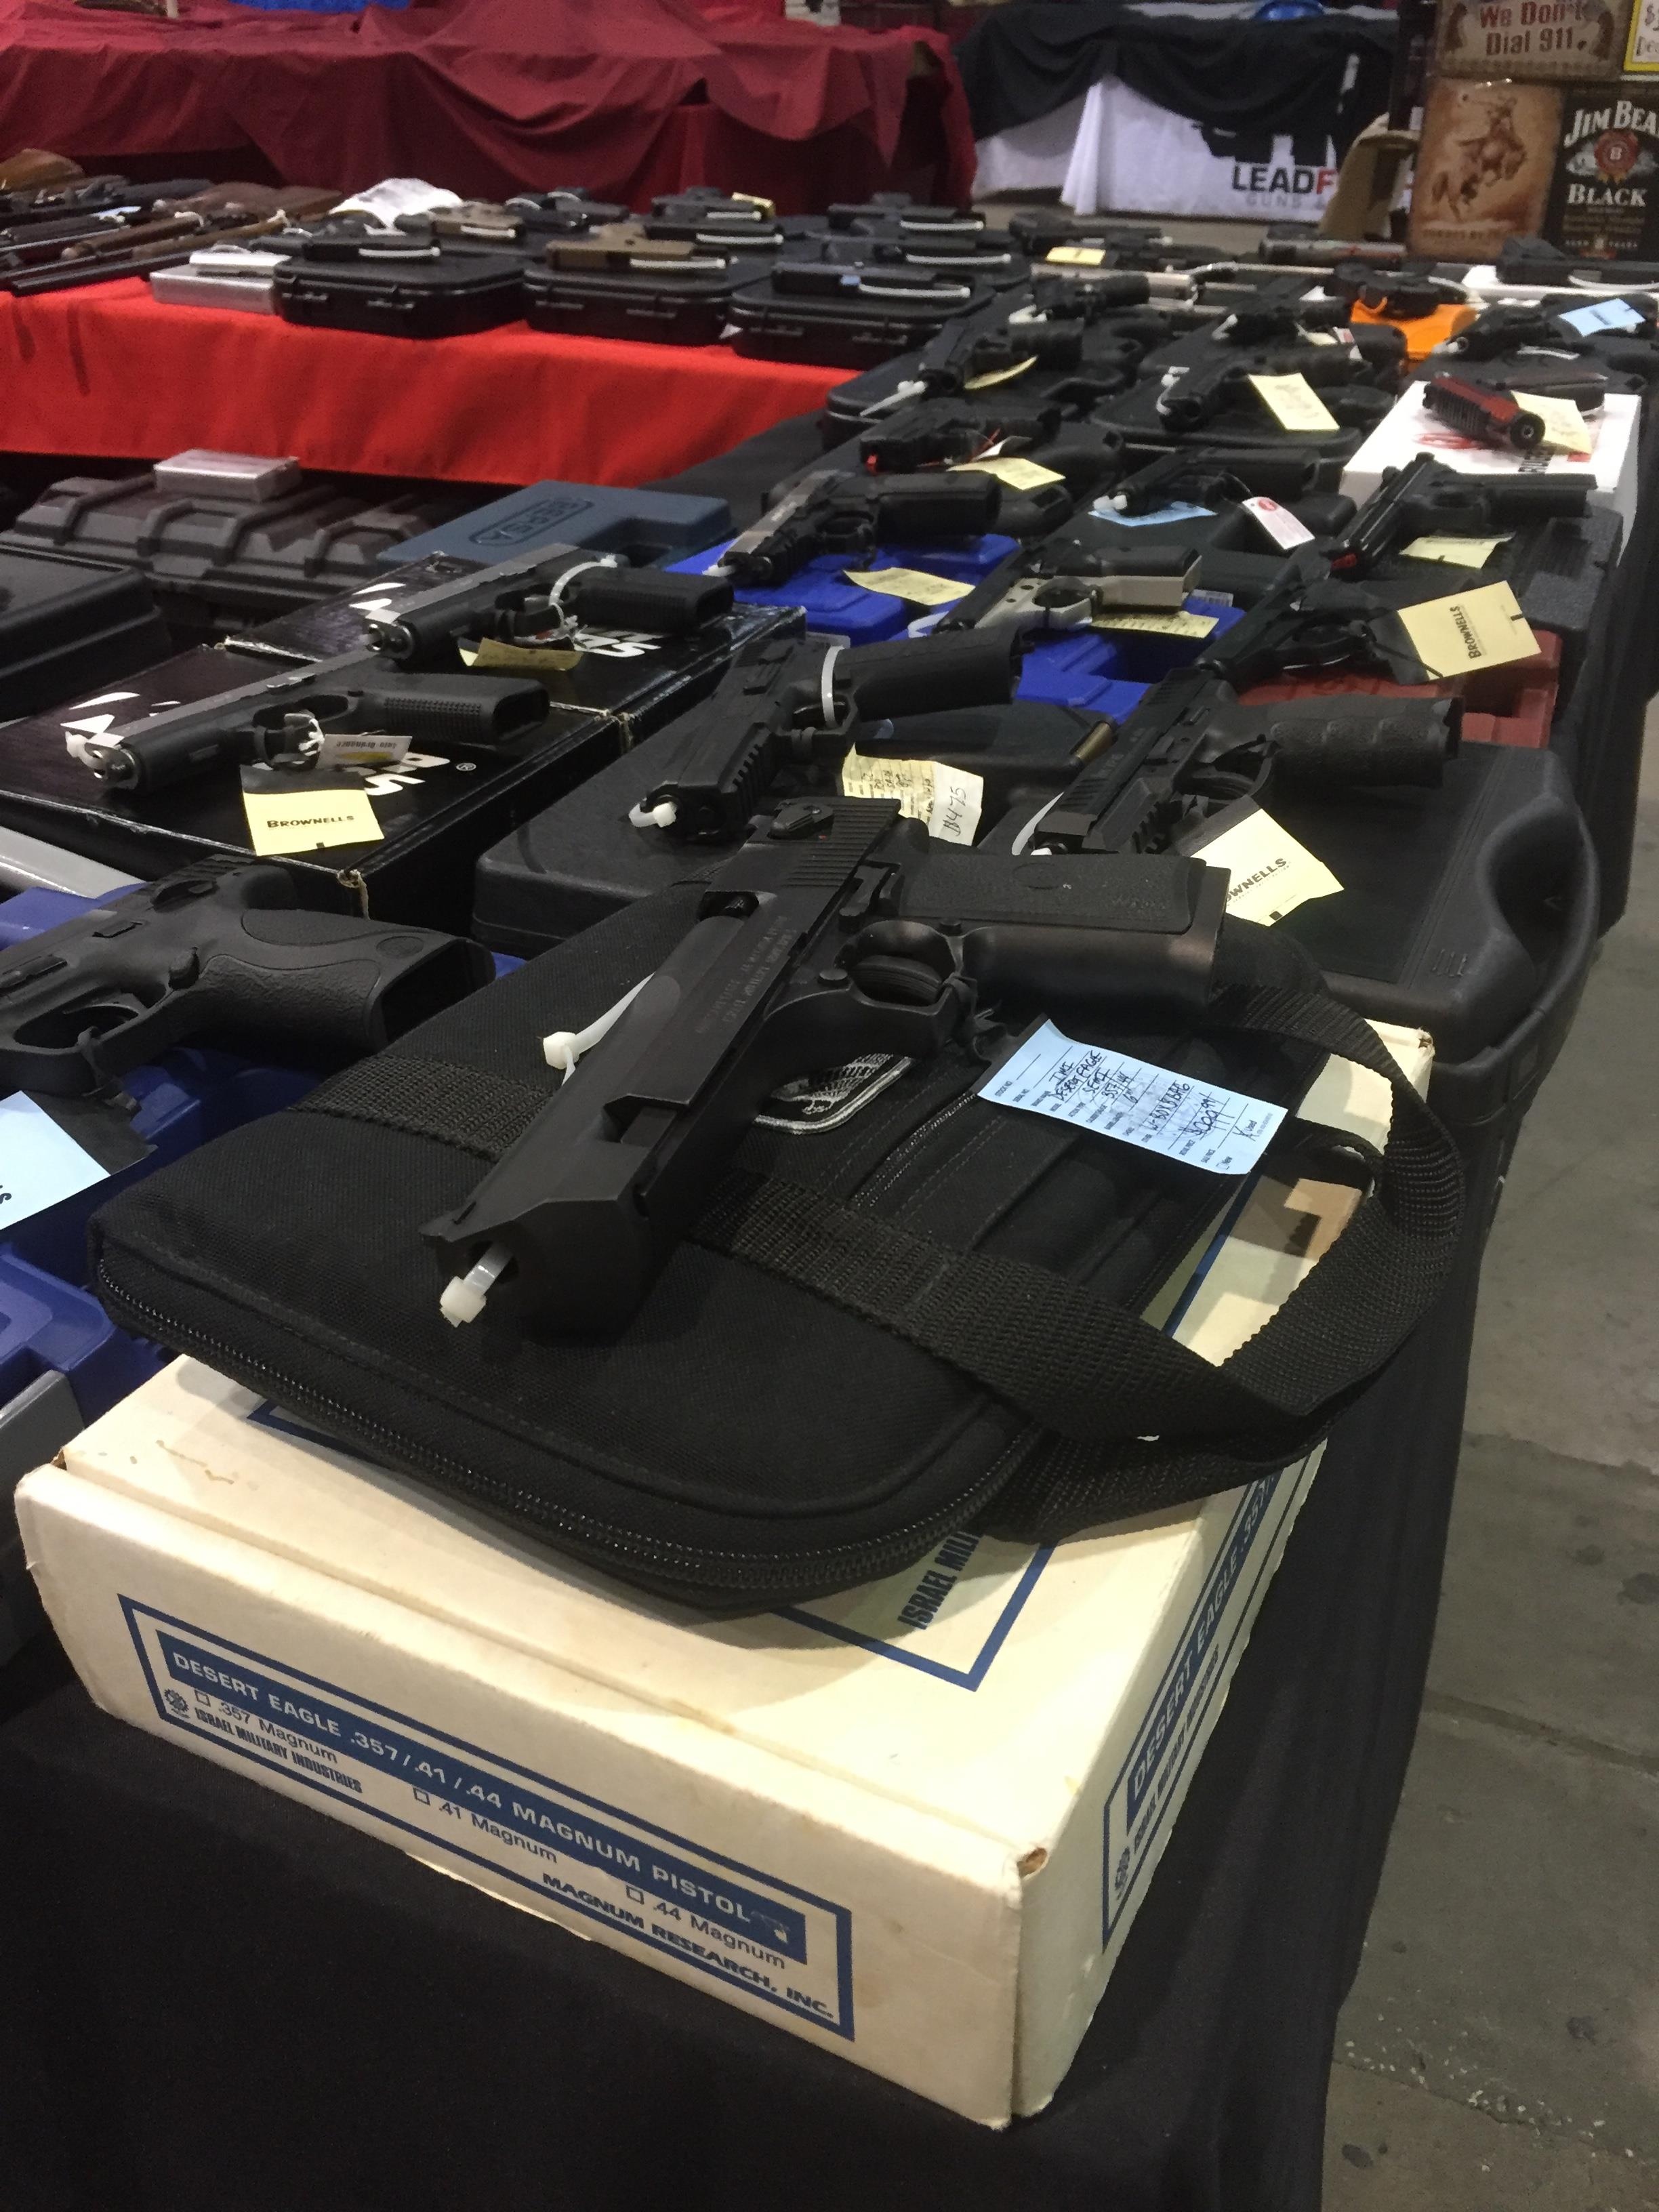 Big crowds expected at Fort Myers gun show this weekend